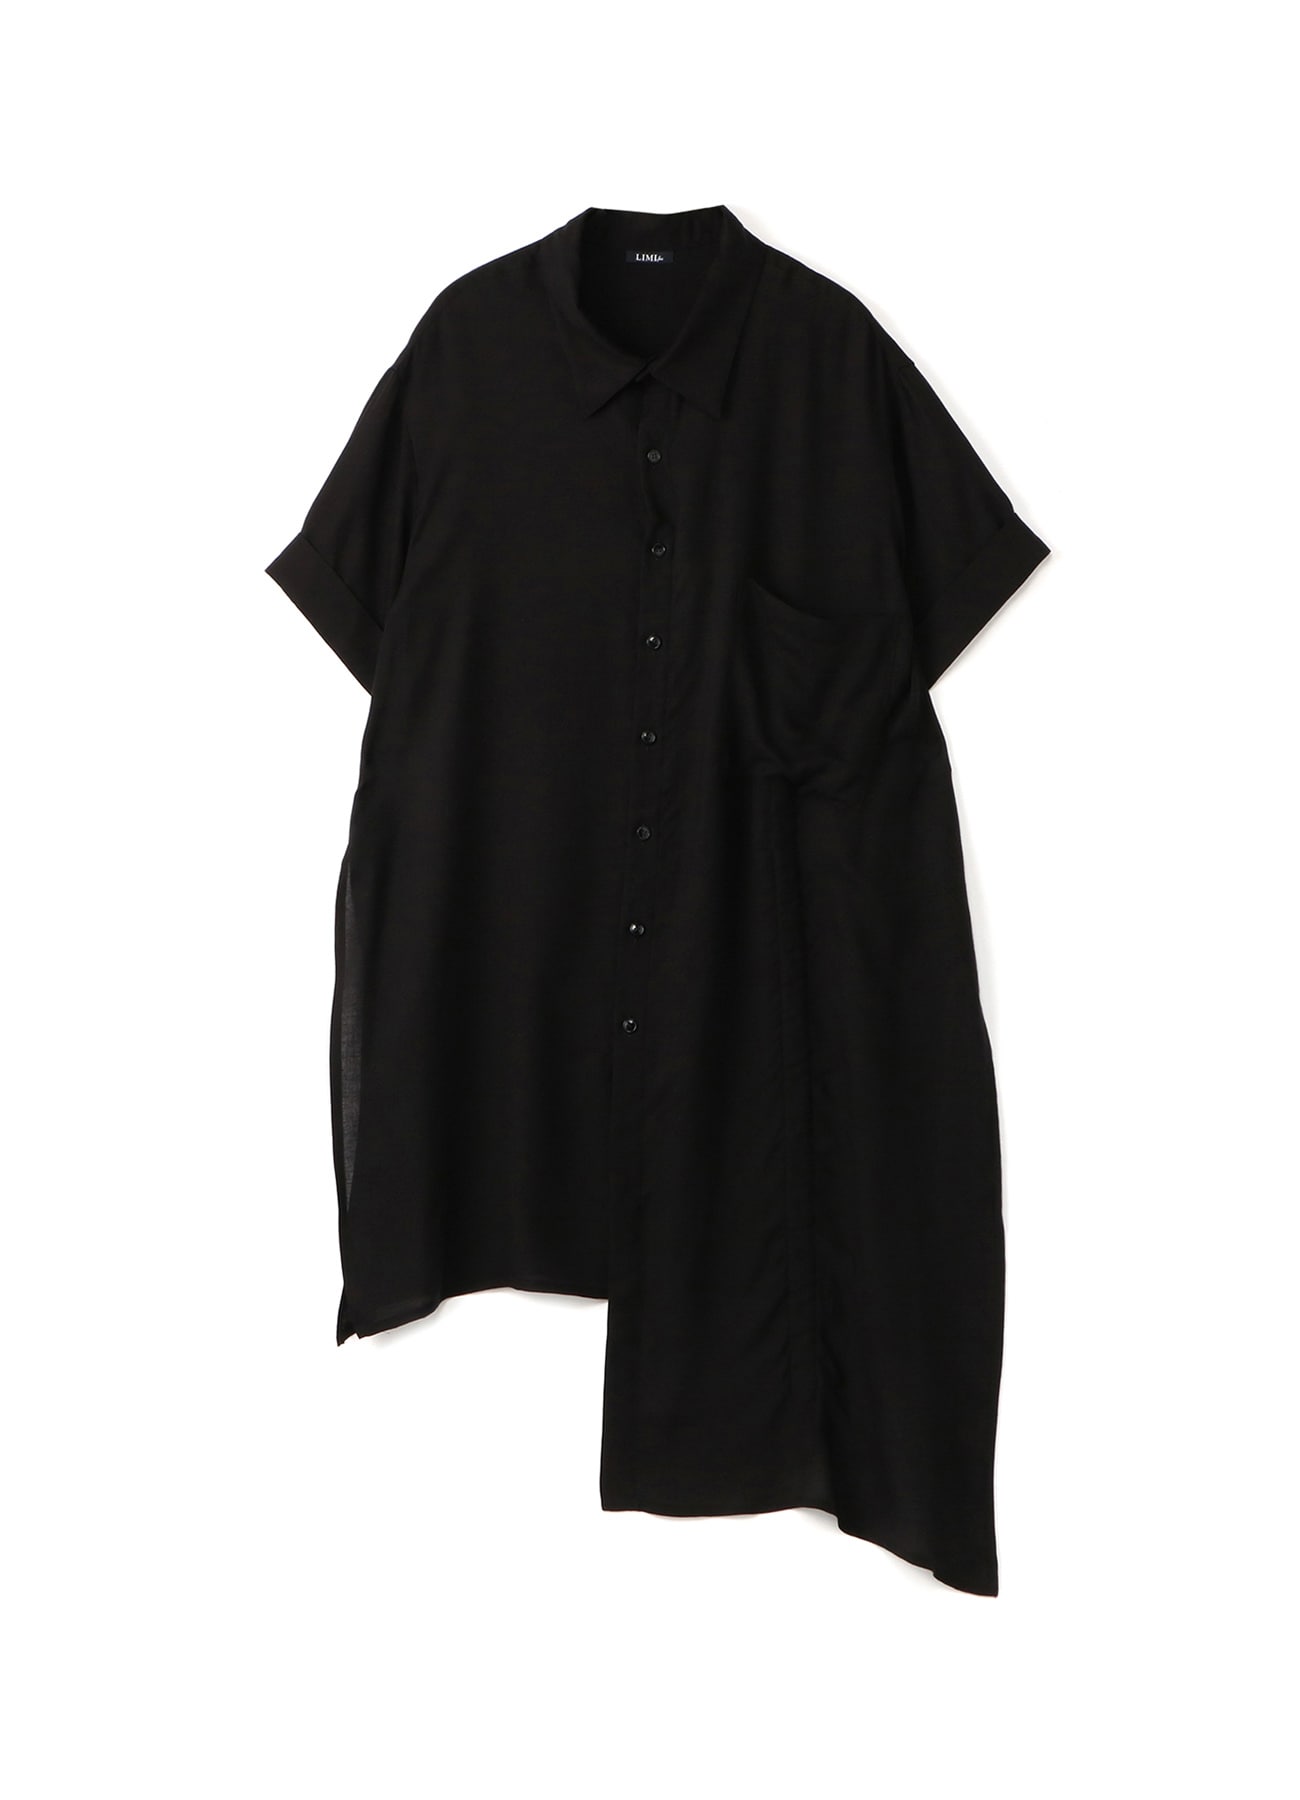 New Arrival | [Official] THE SHOP YOHJI YAMAMOTO (7/16 page)